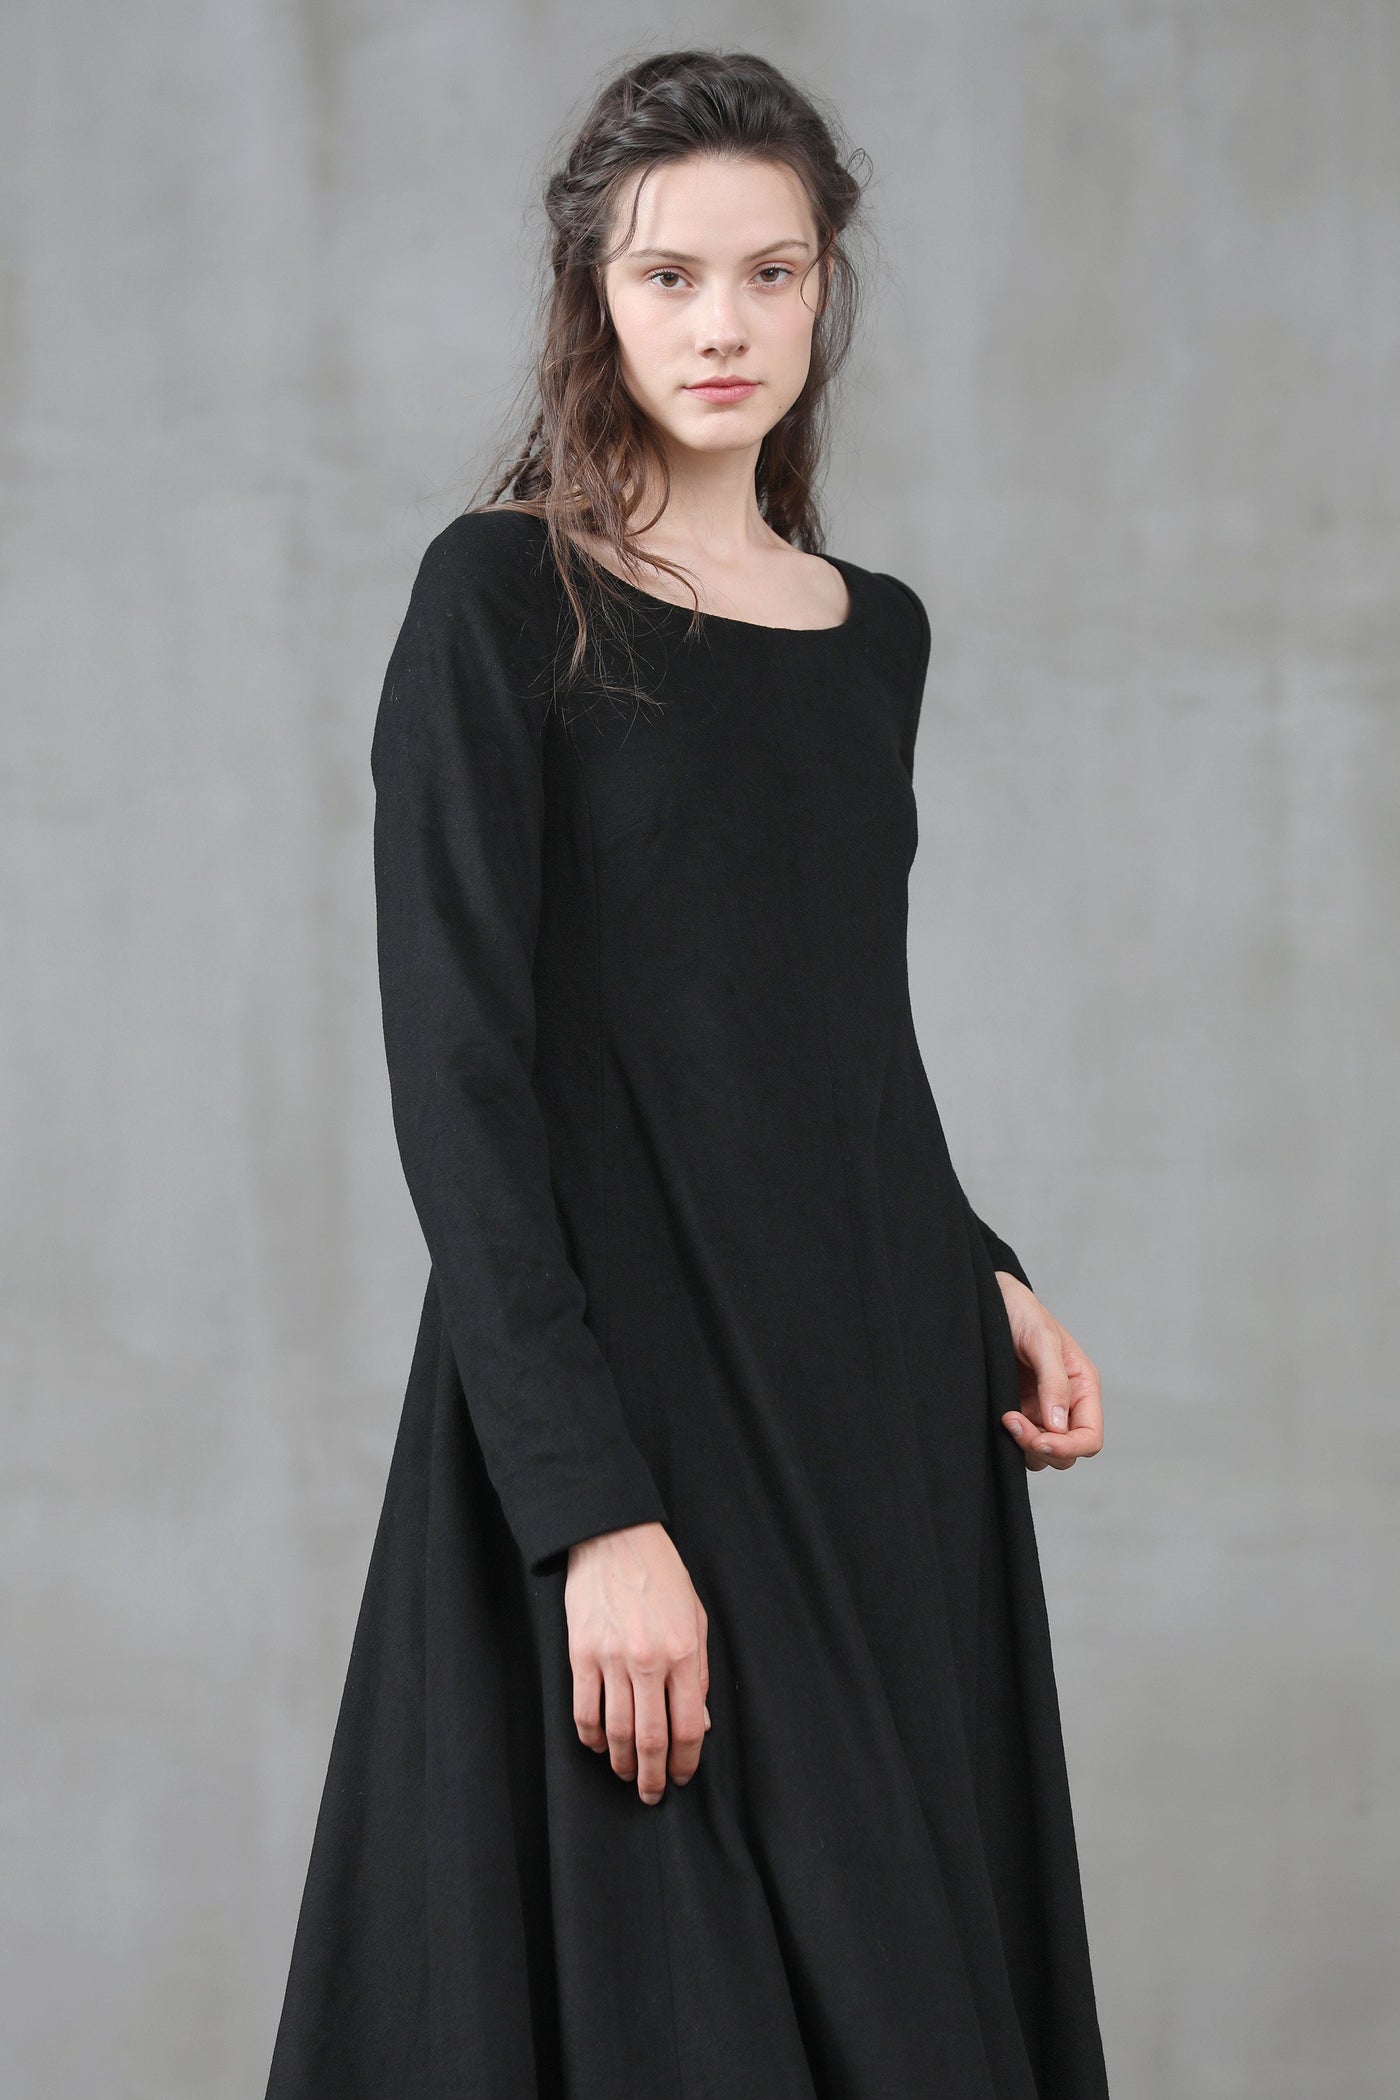 Black wool embroidered dress by Threeness | The Secret Label